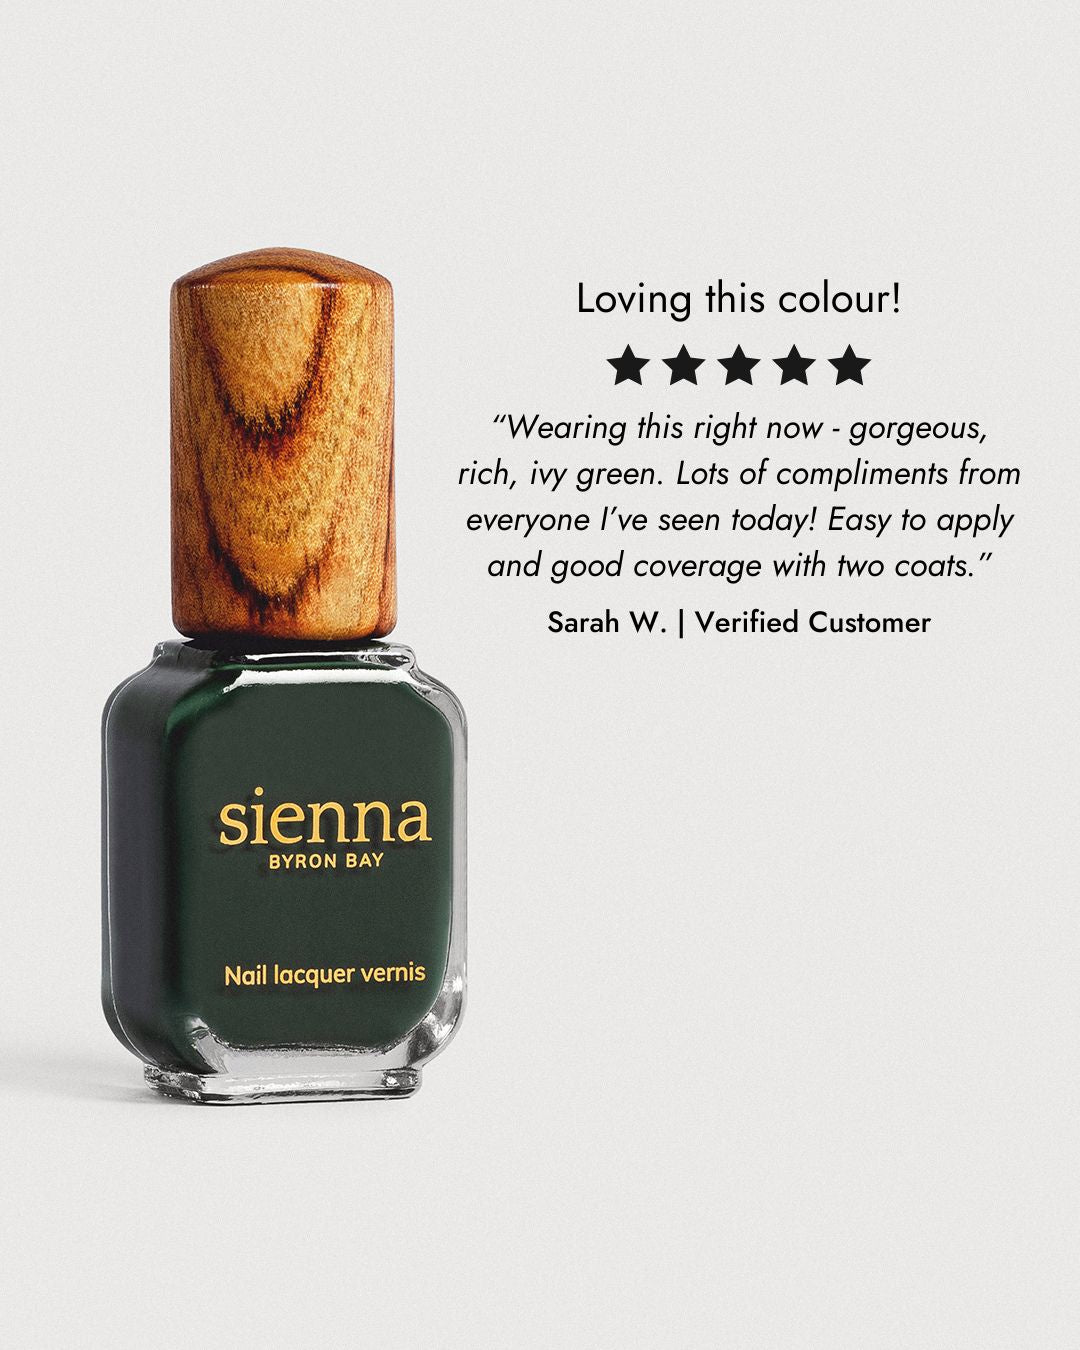 deep olive green nail polish glass bottle with 5 star review